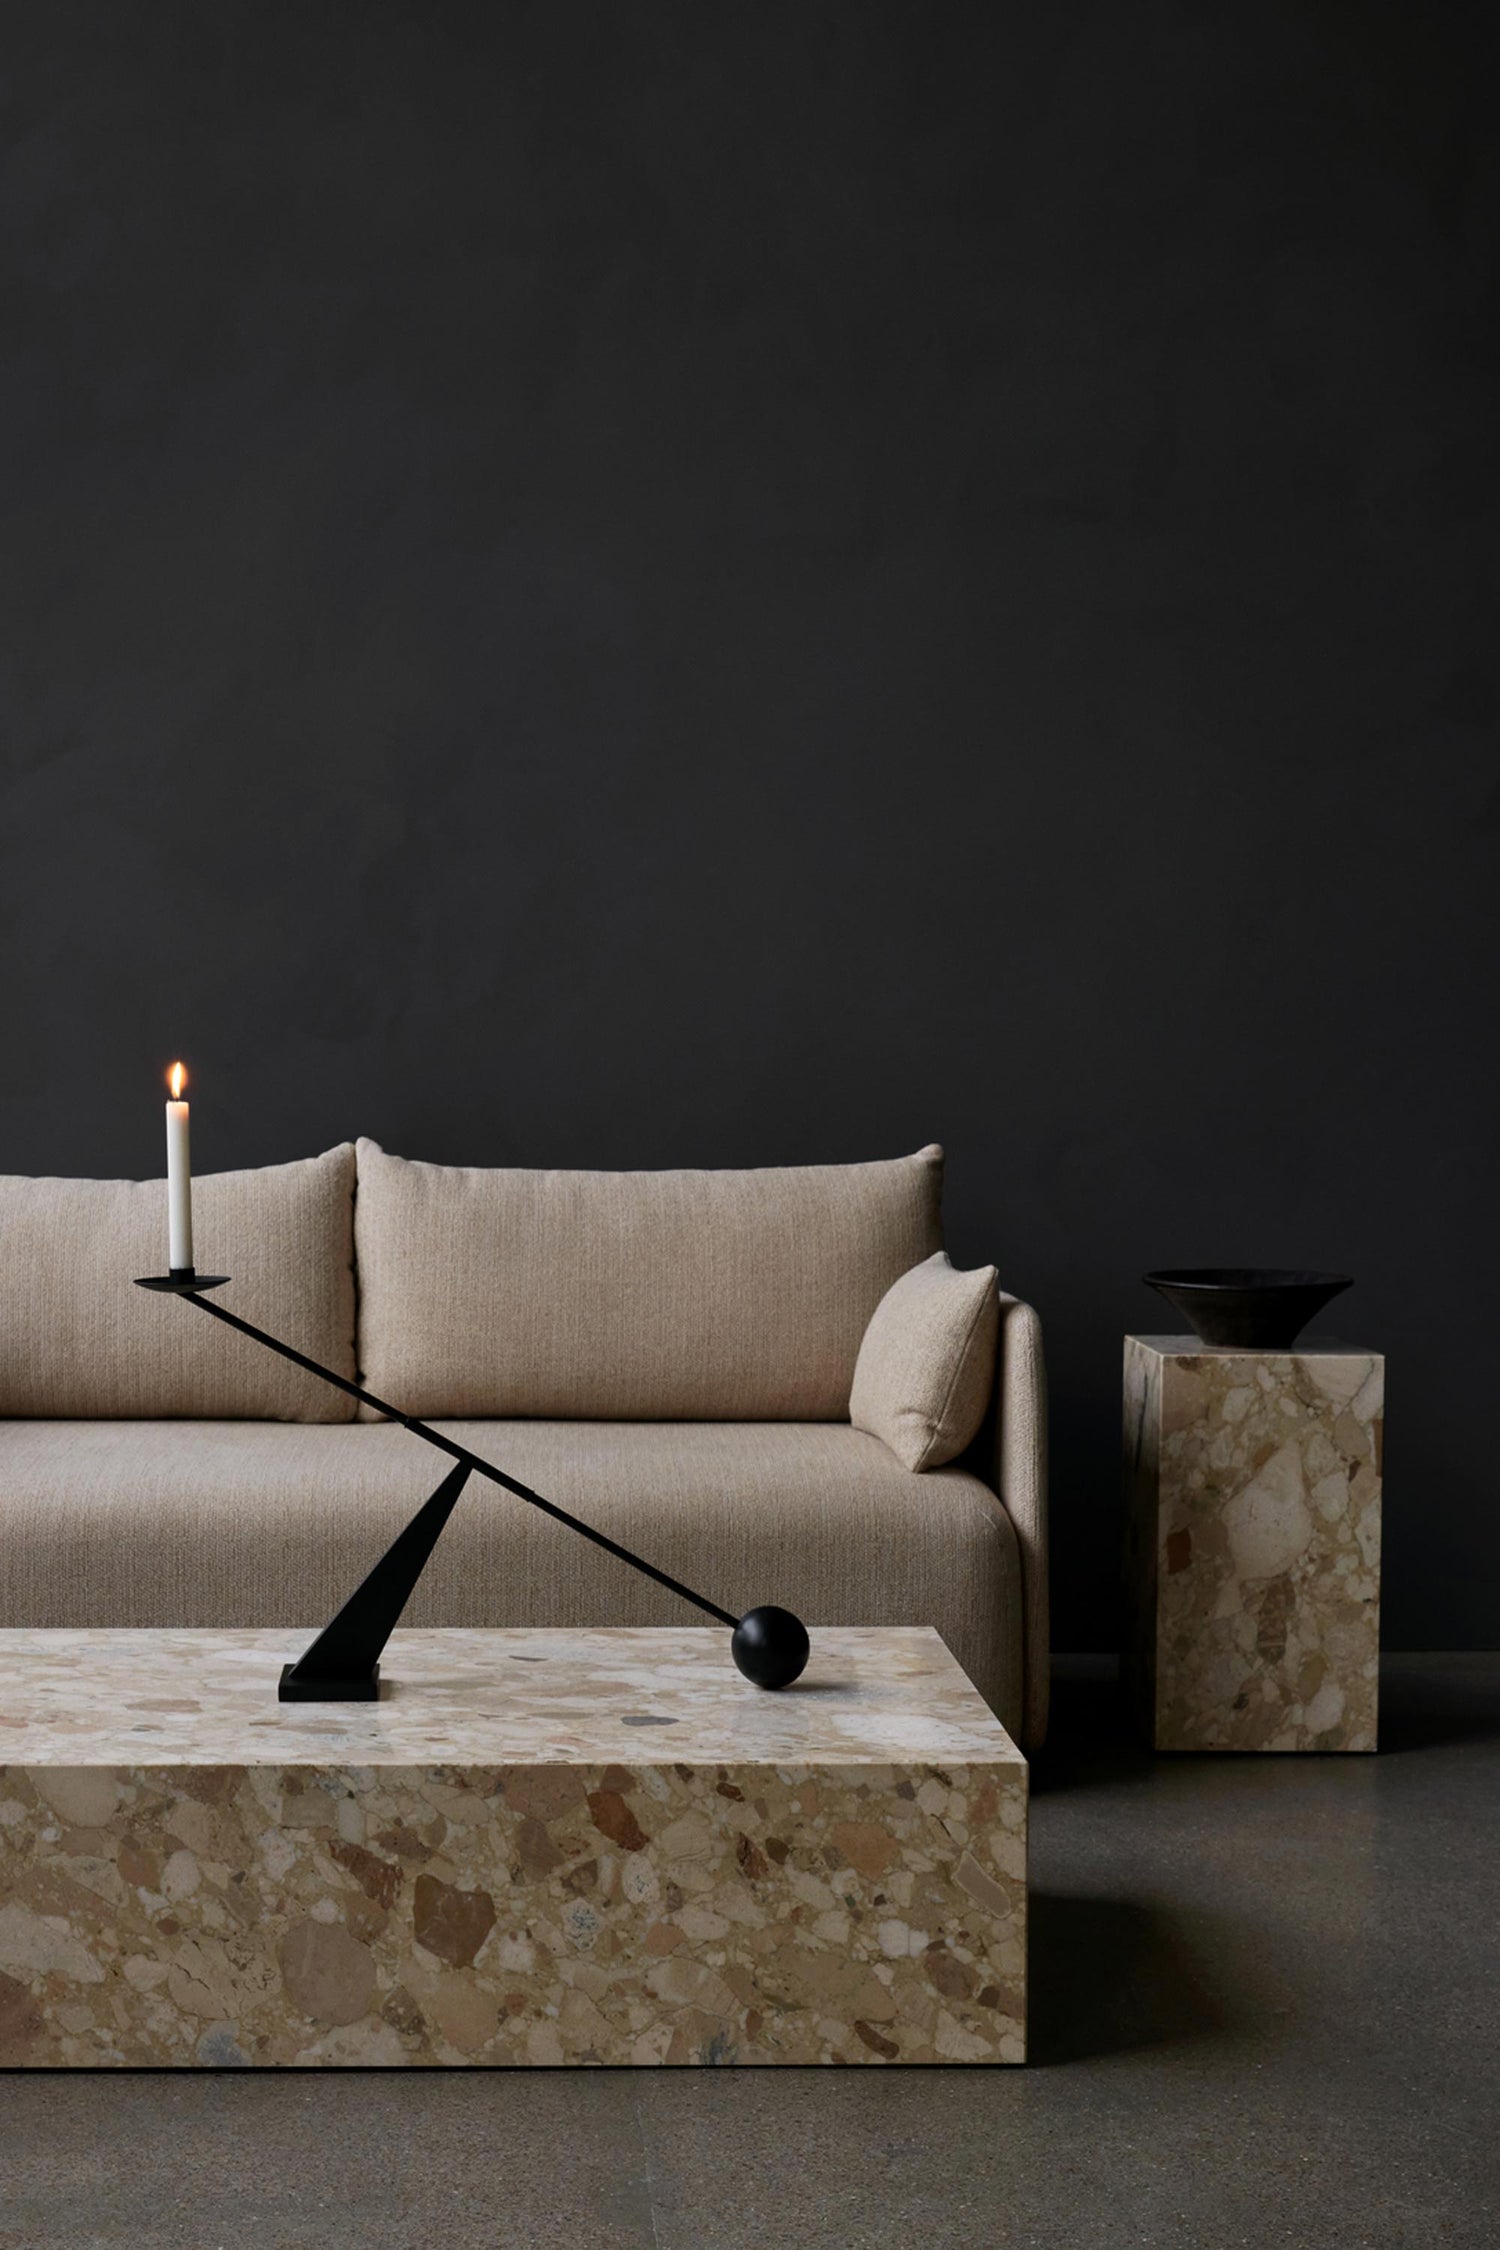 Audo Couch Marble Table and Black Candleholder 